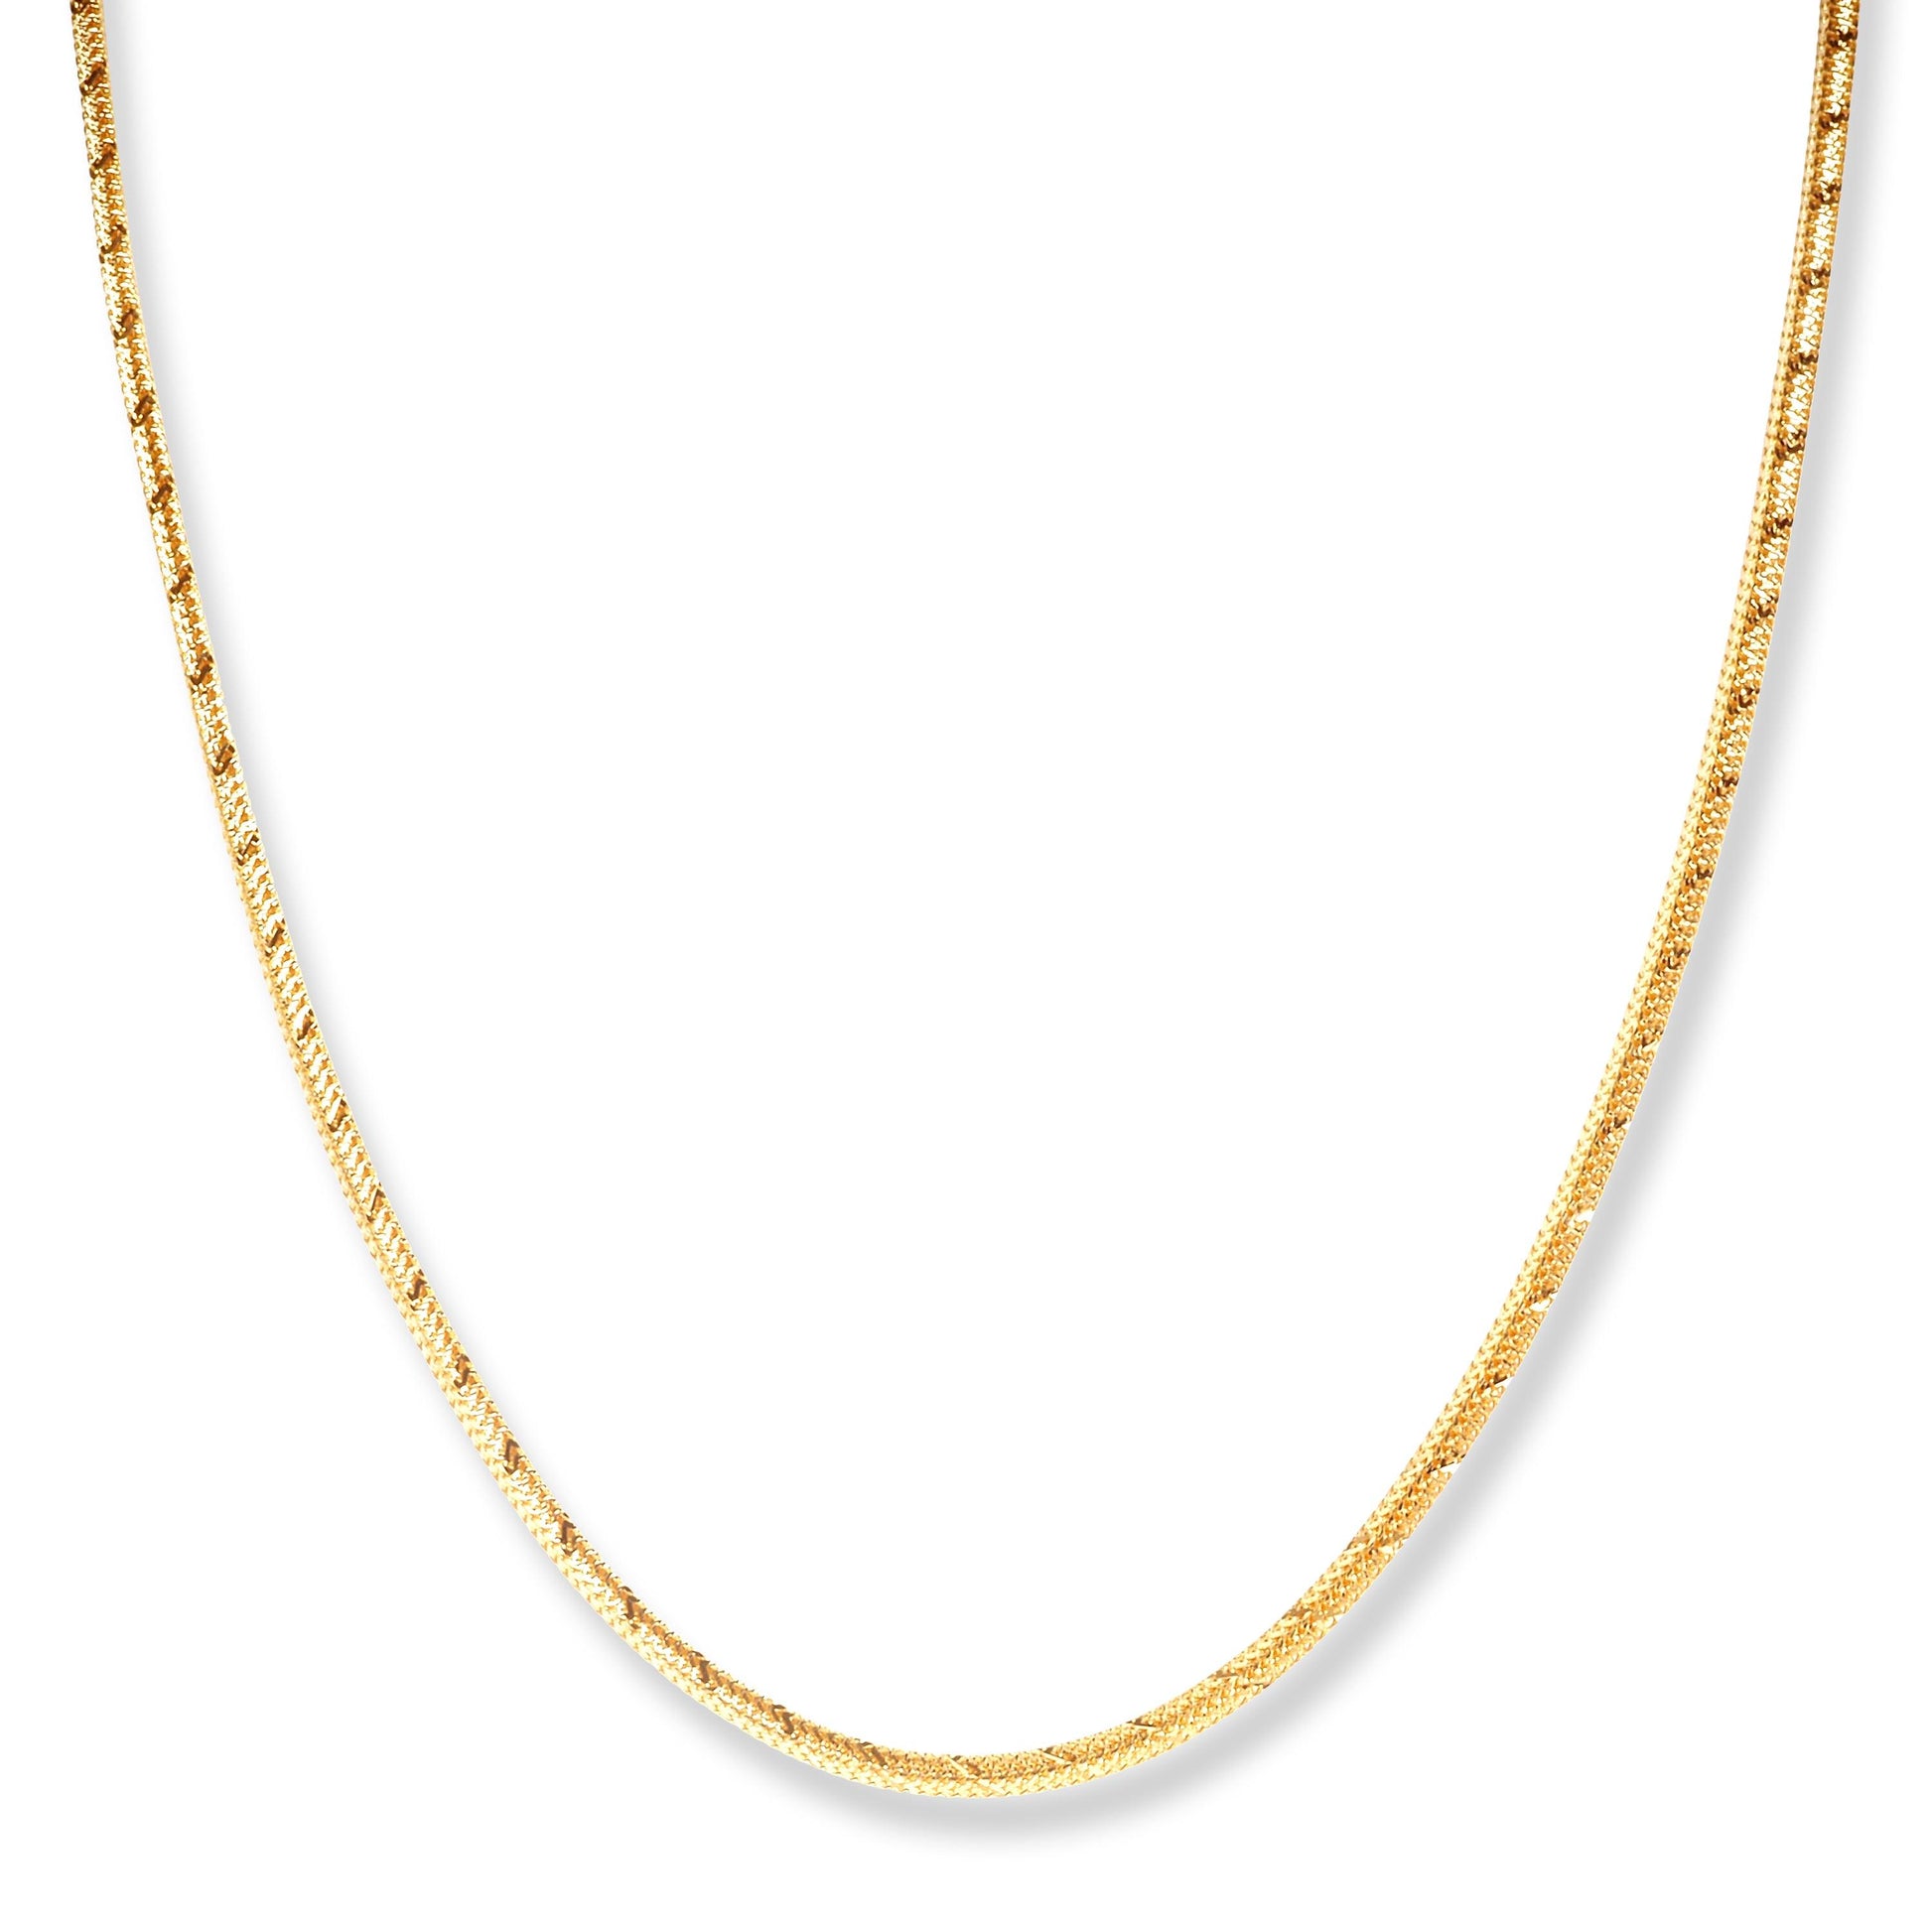 22ct Gold Square Foxtail Chain with Lobster Clasp C-7135 - Minar Jewellers